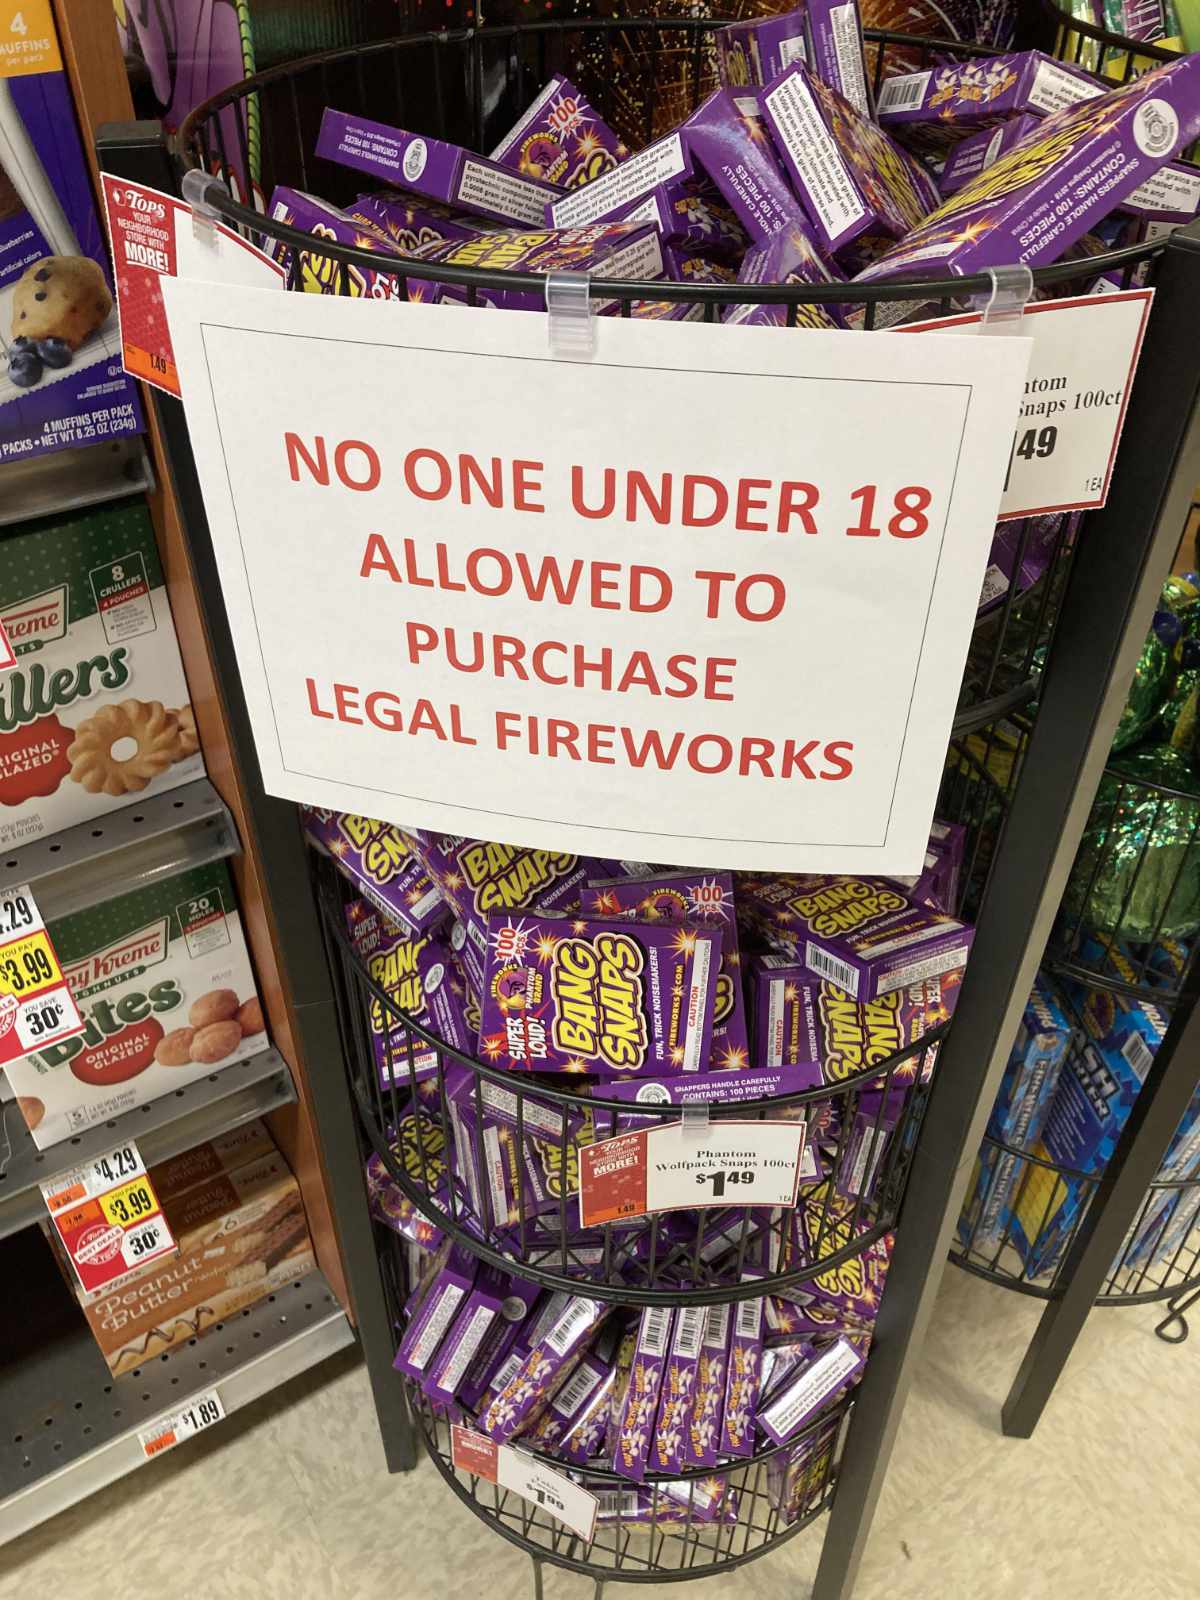 So, only illegal fireworks then